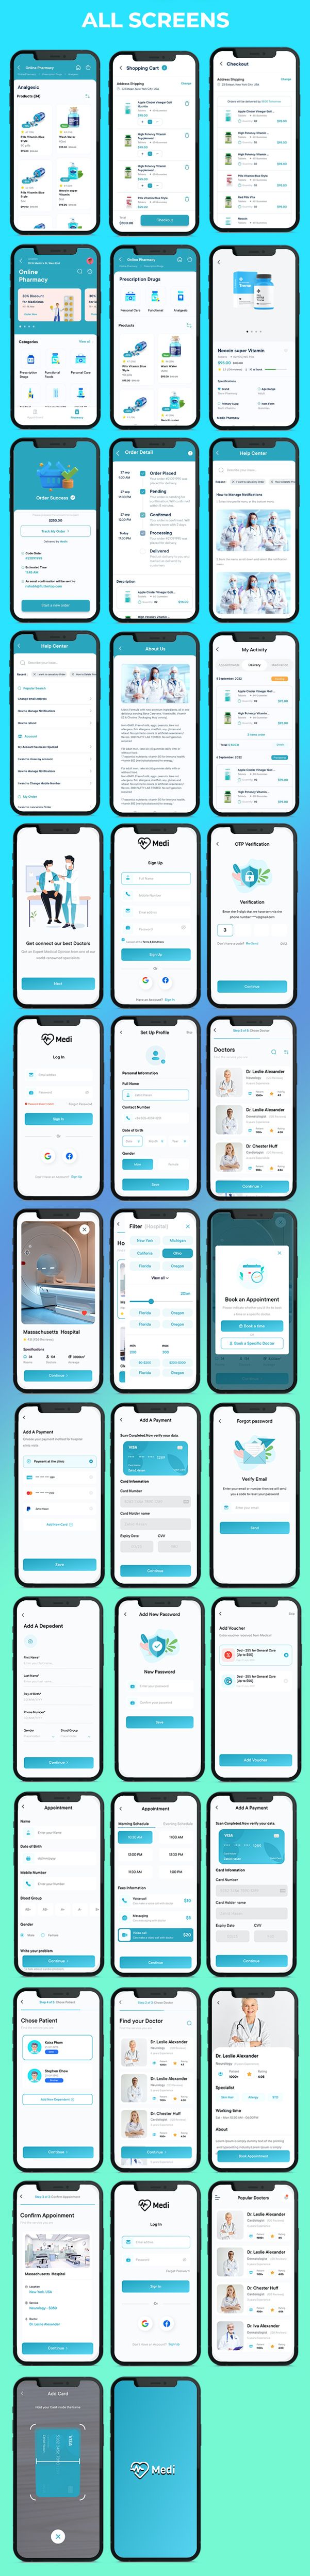 Medi - Doctor Appointment Booking Flutter App UI Template - 8